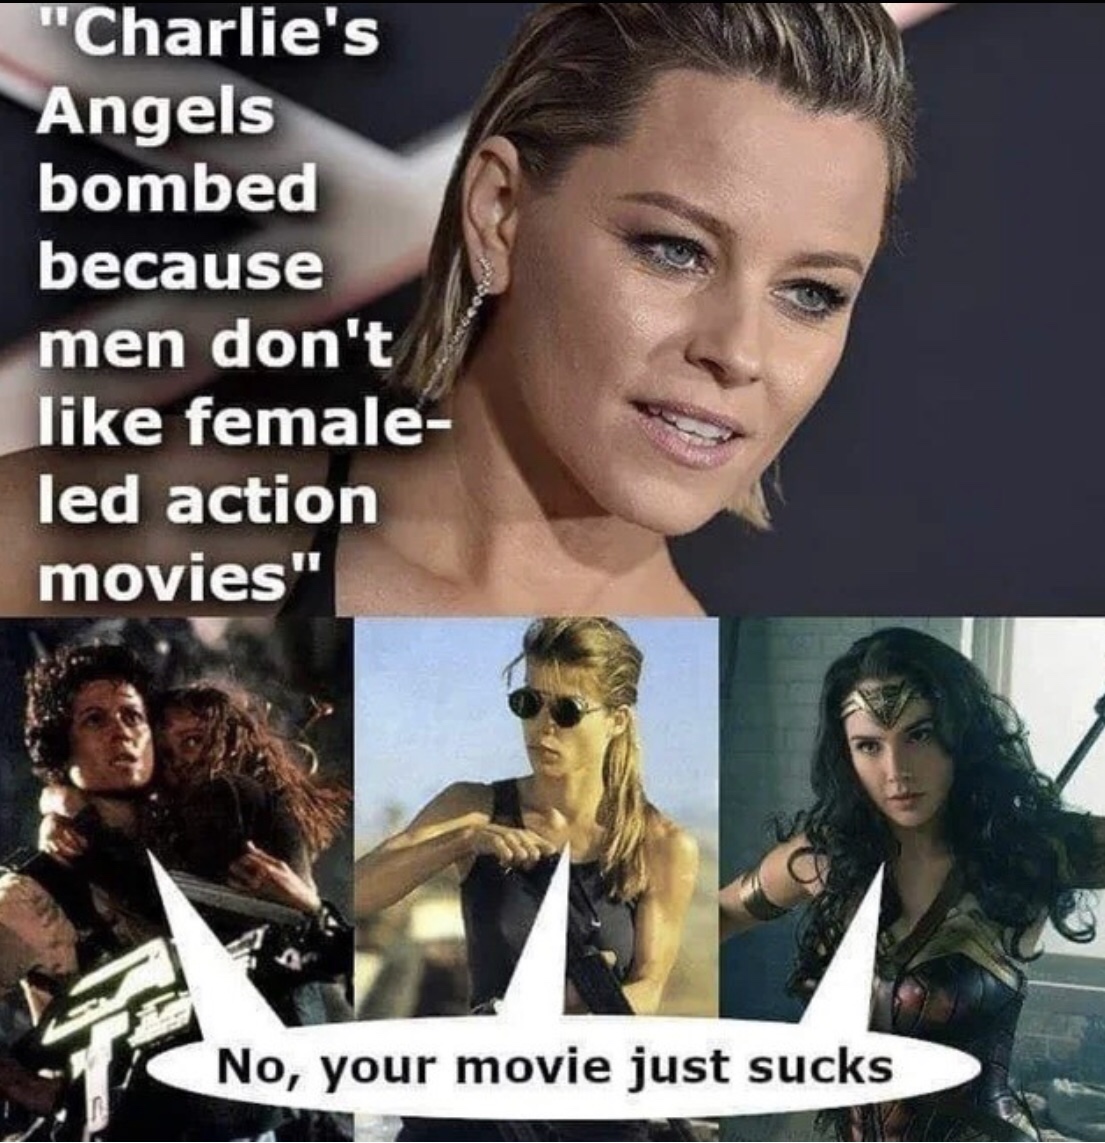 photo caption - "Charlie's Angels bombed because men don't female led action movies" No, your movie just sucks